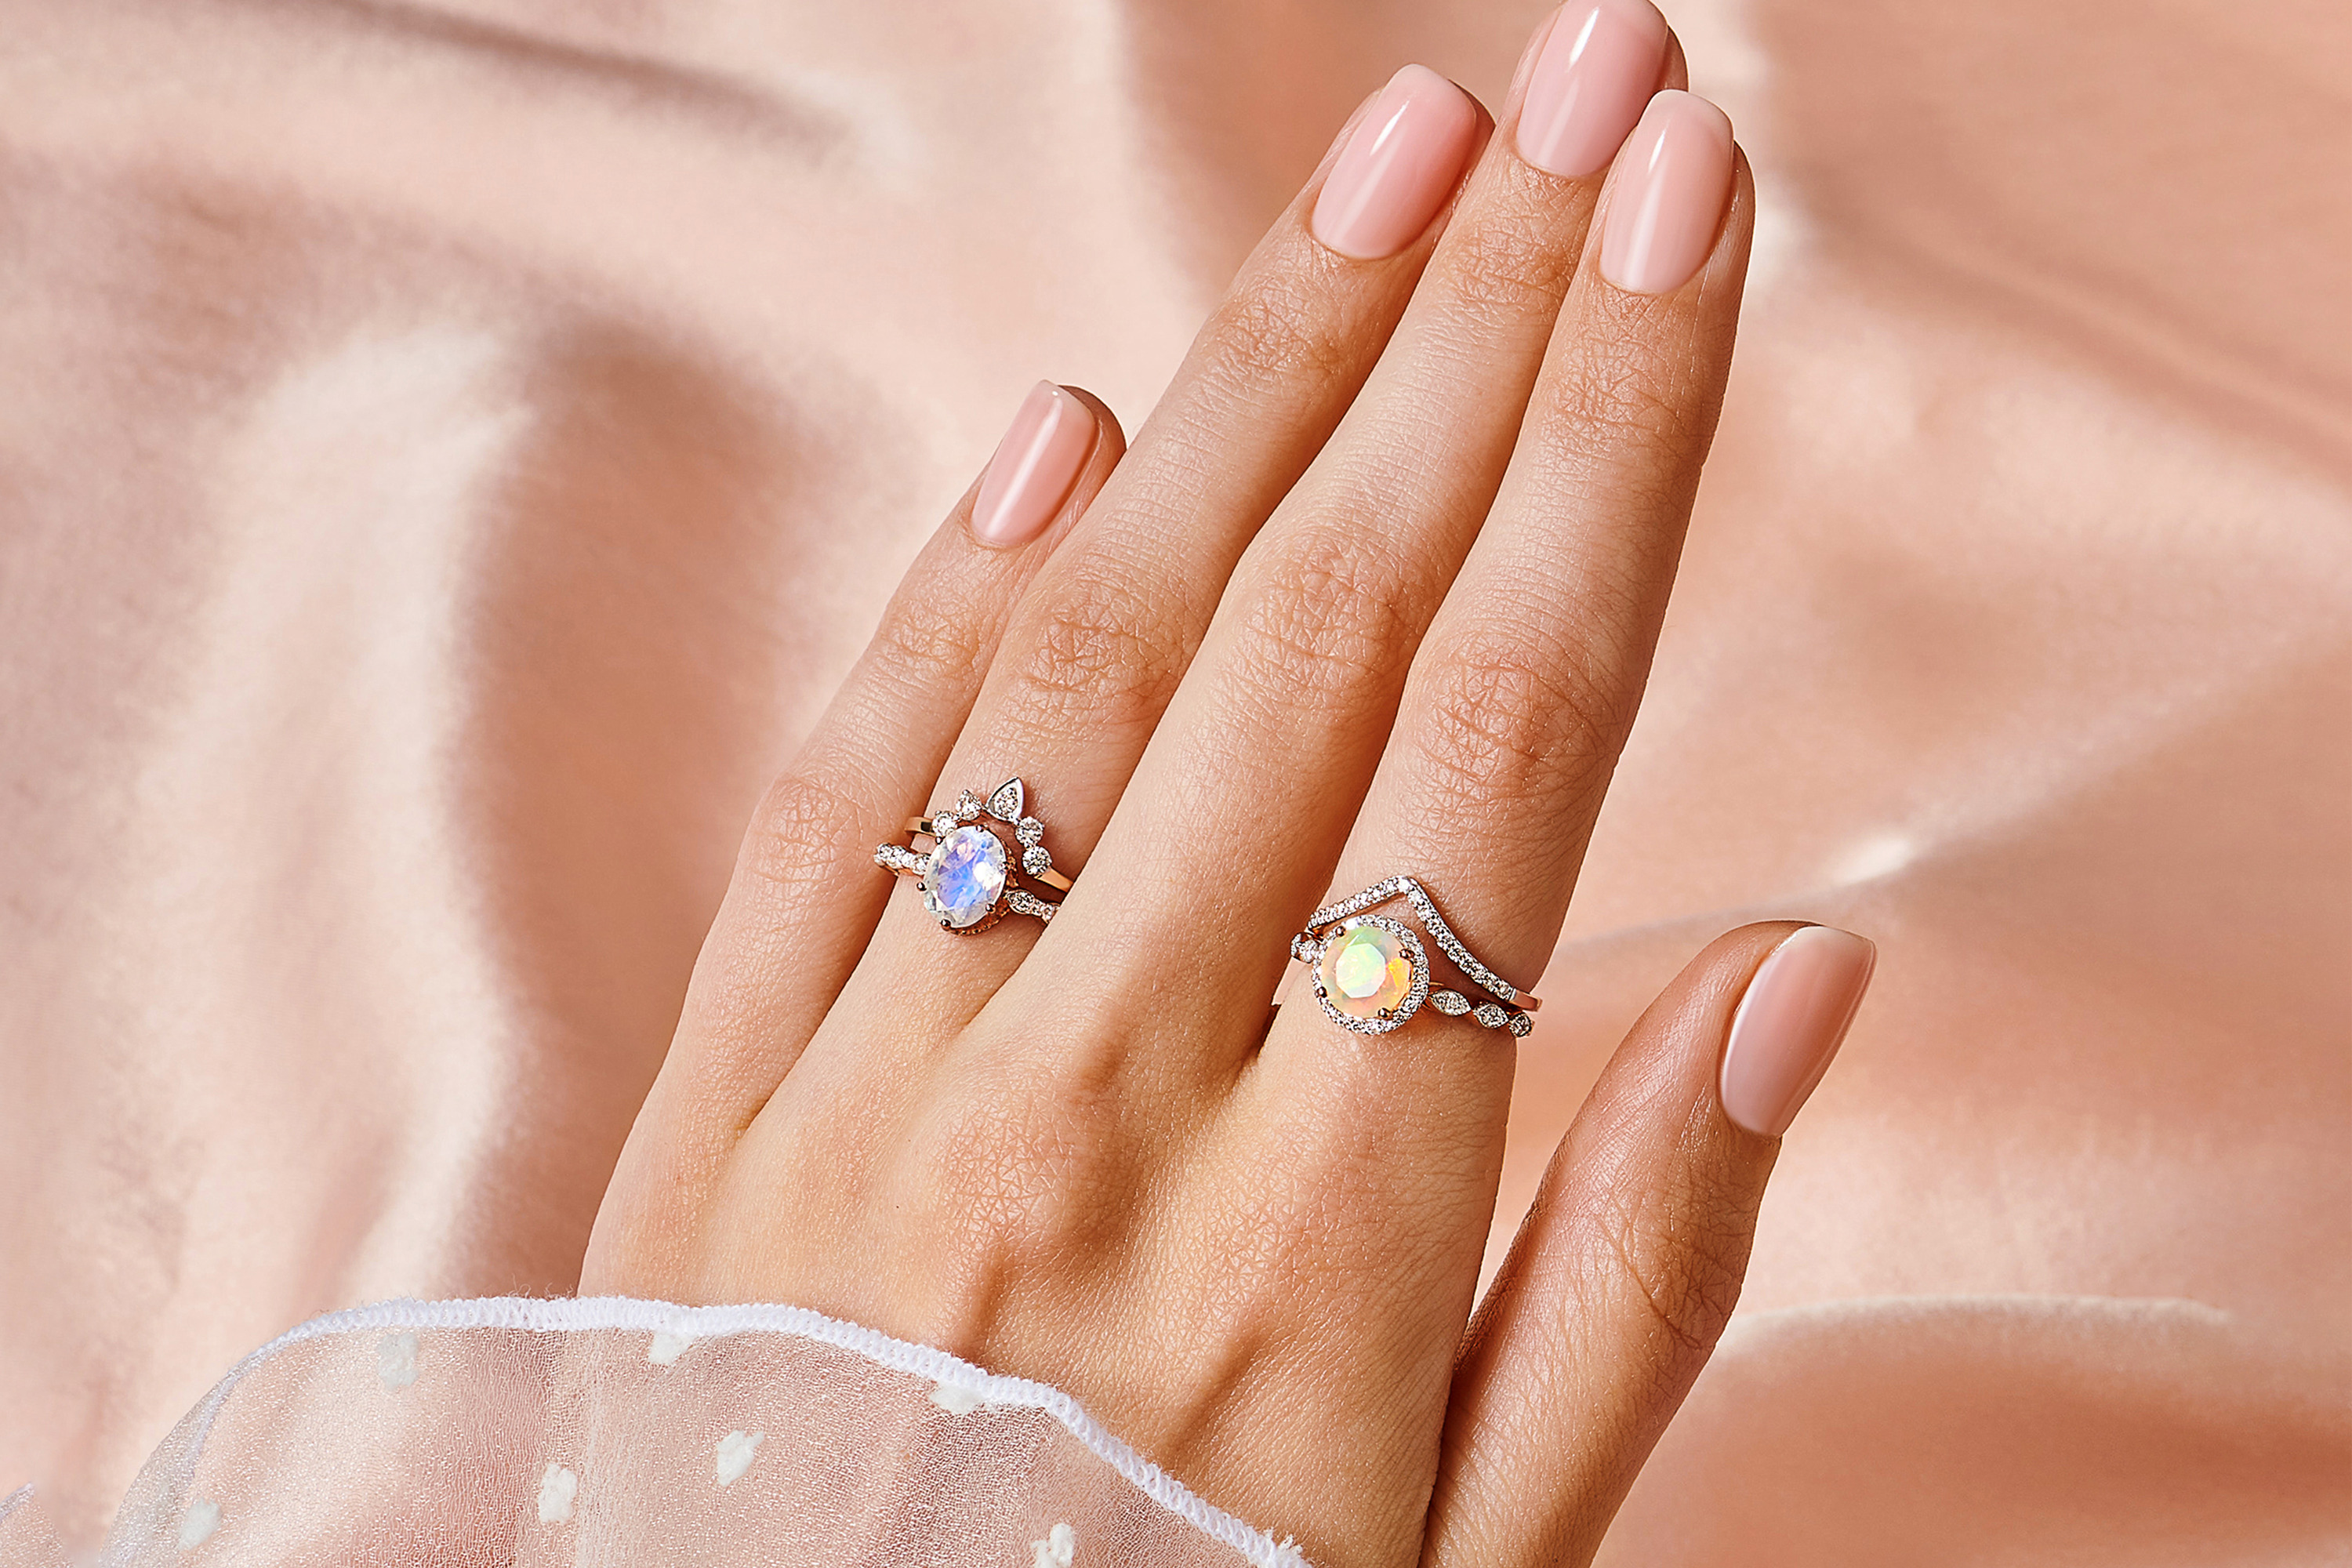 A woman is wearing Opal Diamond Ring - Soulmate paired with Diamond Ring - Bonding Arc and Moonstone Ring with Diamonds - Mirth paired with Diamond Ring - Vow.